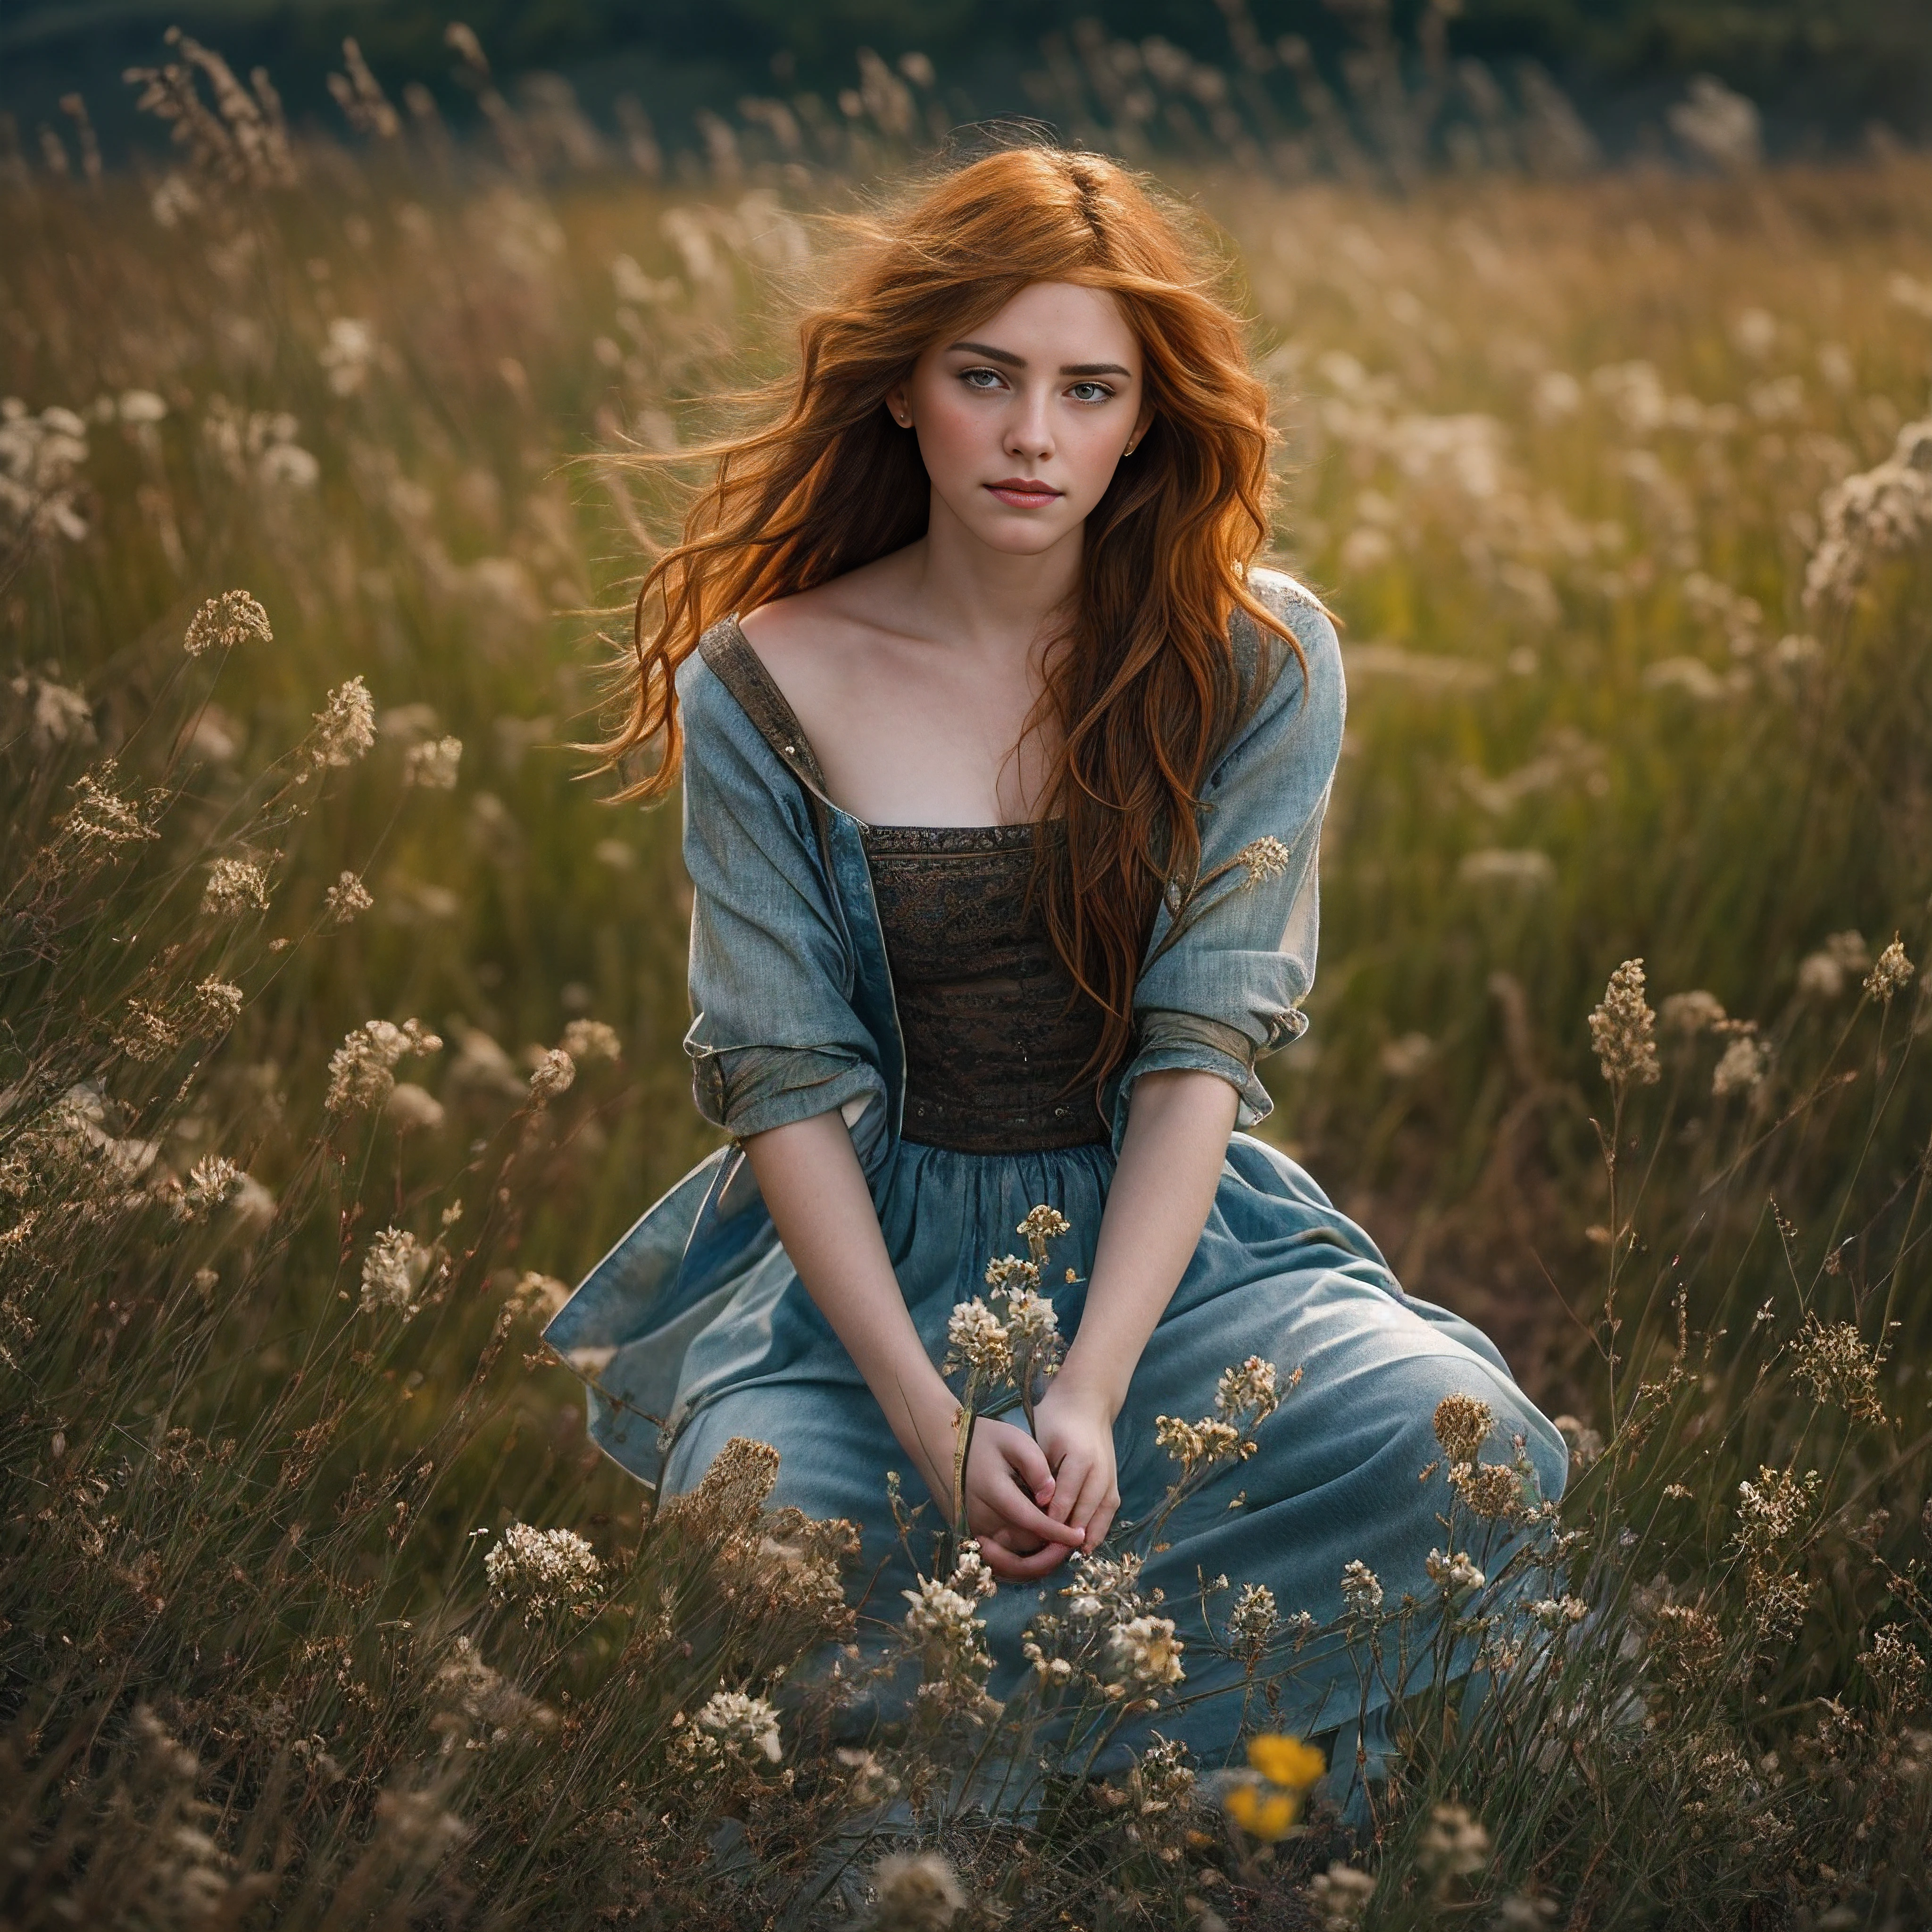 Masterpiece portrait depicting a stunning redheaded goddess kneeling peacefully amidst a flowering meadow, arms folded across her chest, gazing thoughtfully into the distance with serene blue eyes, windswept crimson locks frame her delicate features, precise hands and flawless freckled skin glow in the natural light, exceptionally detailed and photorealistic quality resembling a high resolution RAW digital photograph, dramatic cinematic lighting creates striking realism and intimate ambience, intricate textures and imperfections mimic natural 35mm film grain, overall composition is perfectly balanced with ideal framing and perspective, this profound work of digital art is masterfully created with a visionary artistic style and meticulous attention to photographic detail including shallow depth of field, prime lens bokeh, and sensor noise.